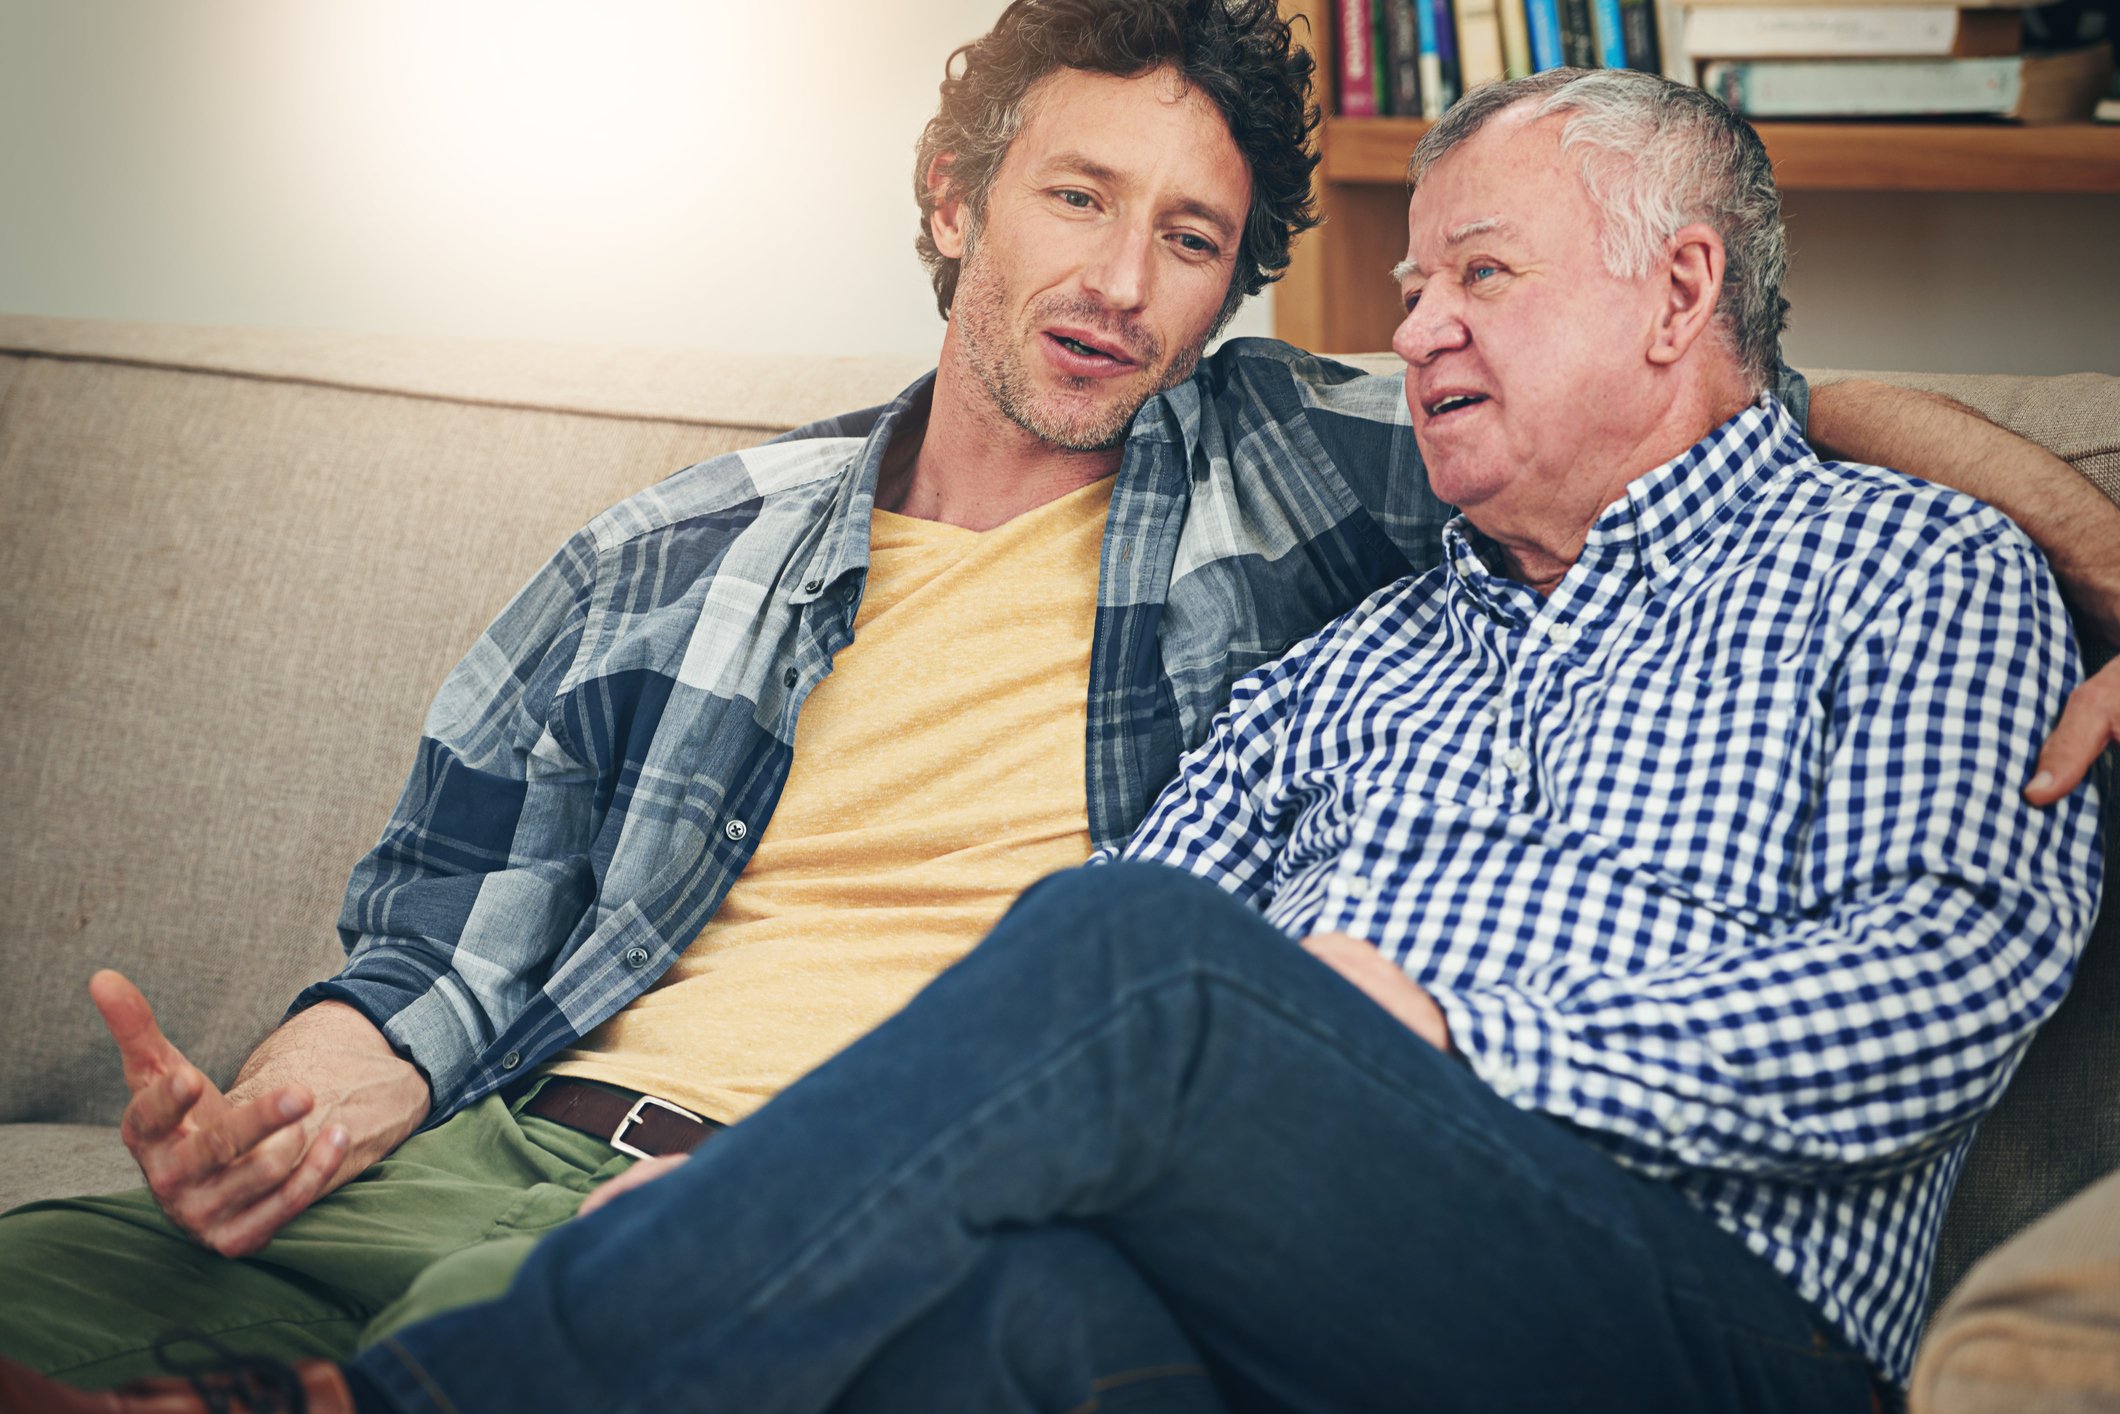 Worried About Your Dad’s Health? Here’s How to Talk to Him